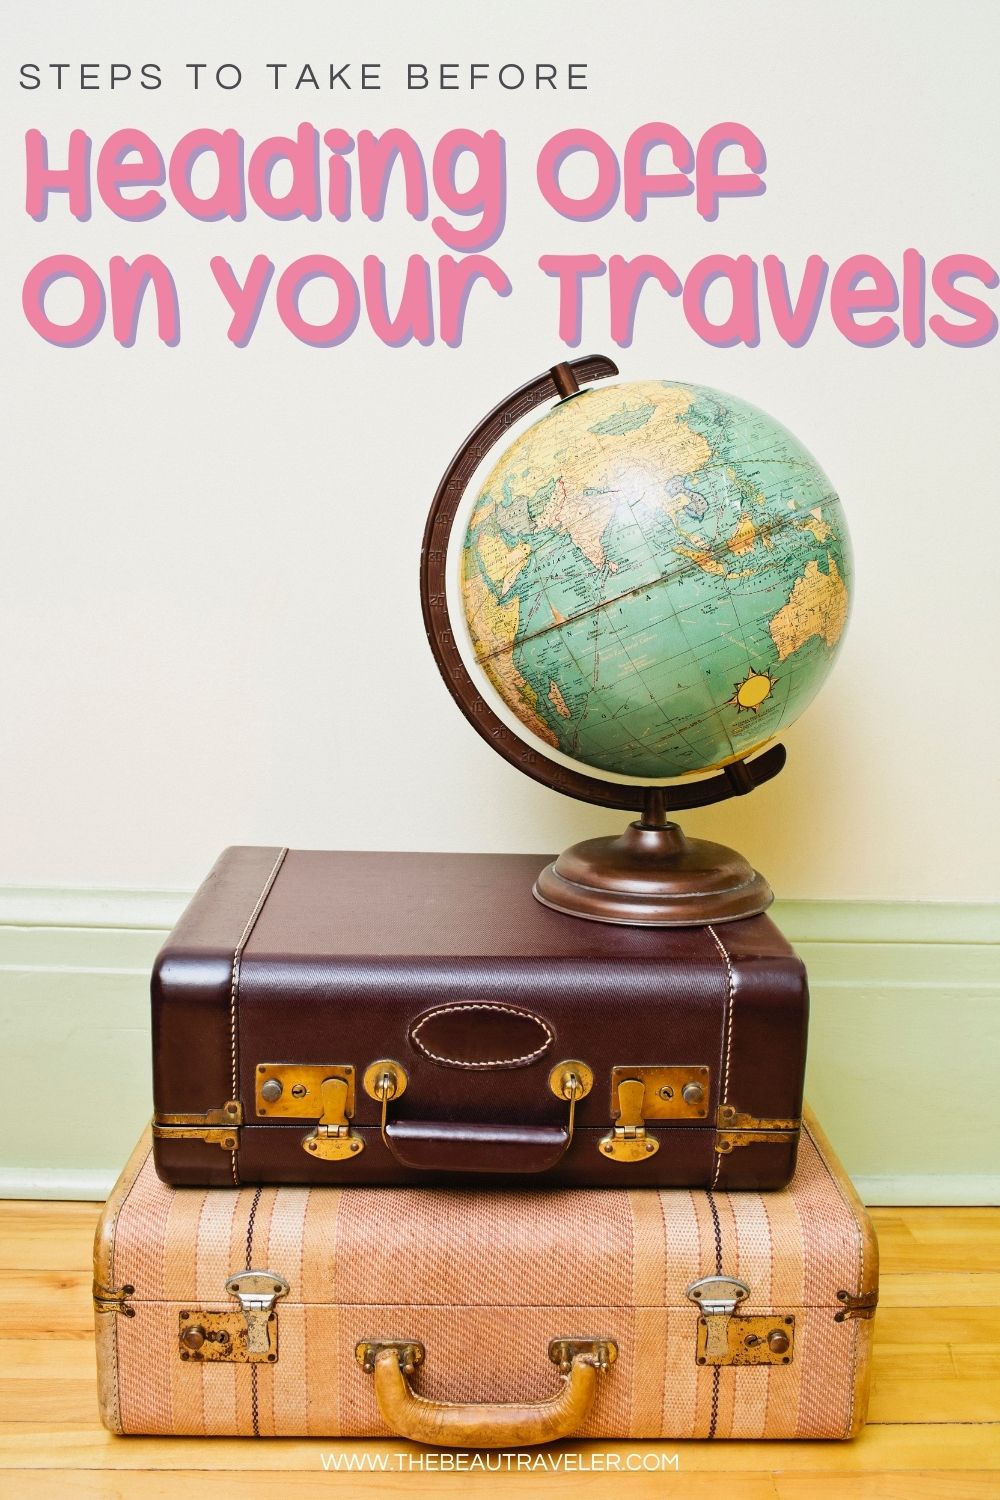 Steps to Take Before Heading Off On Your Travels - The BeauTraveler